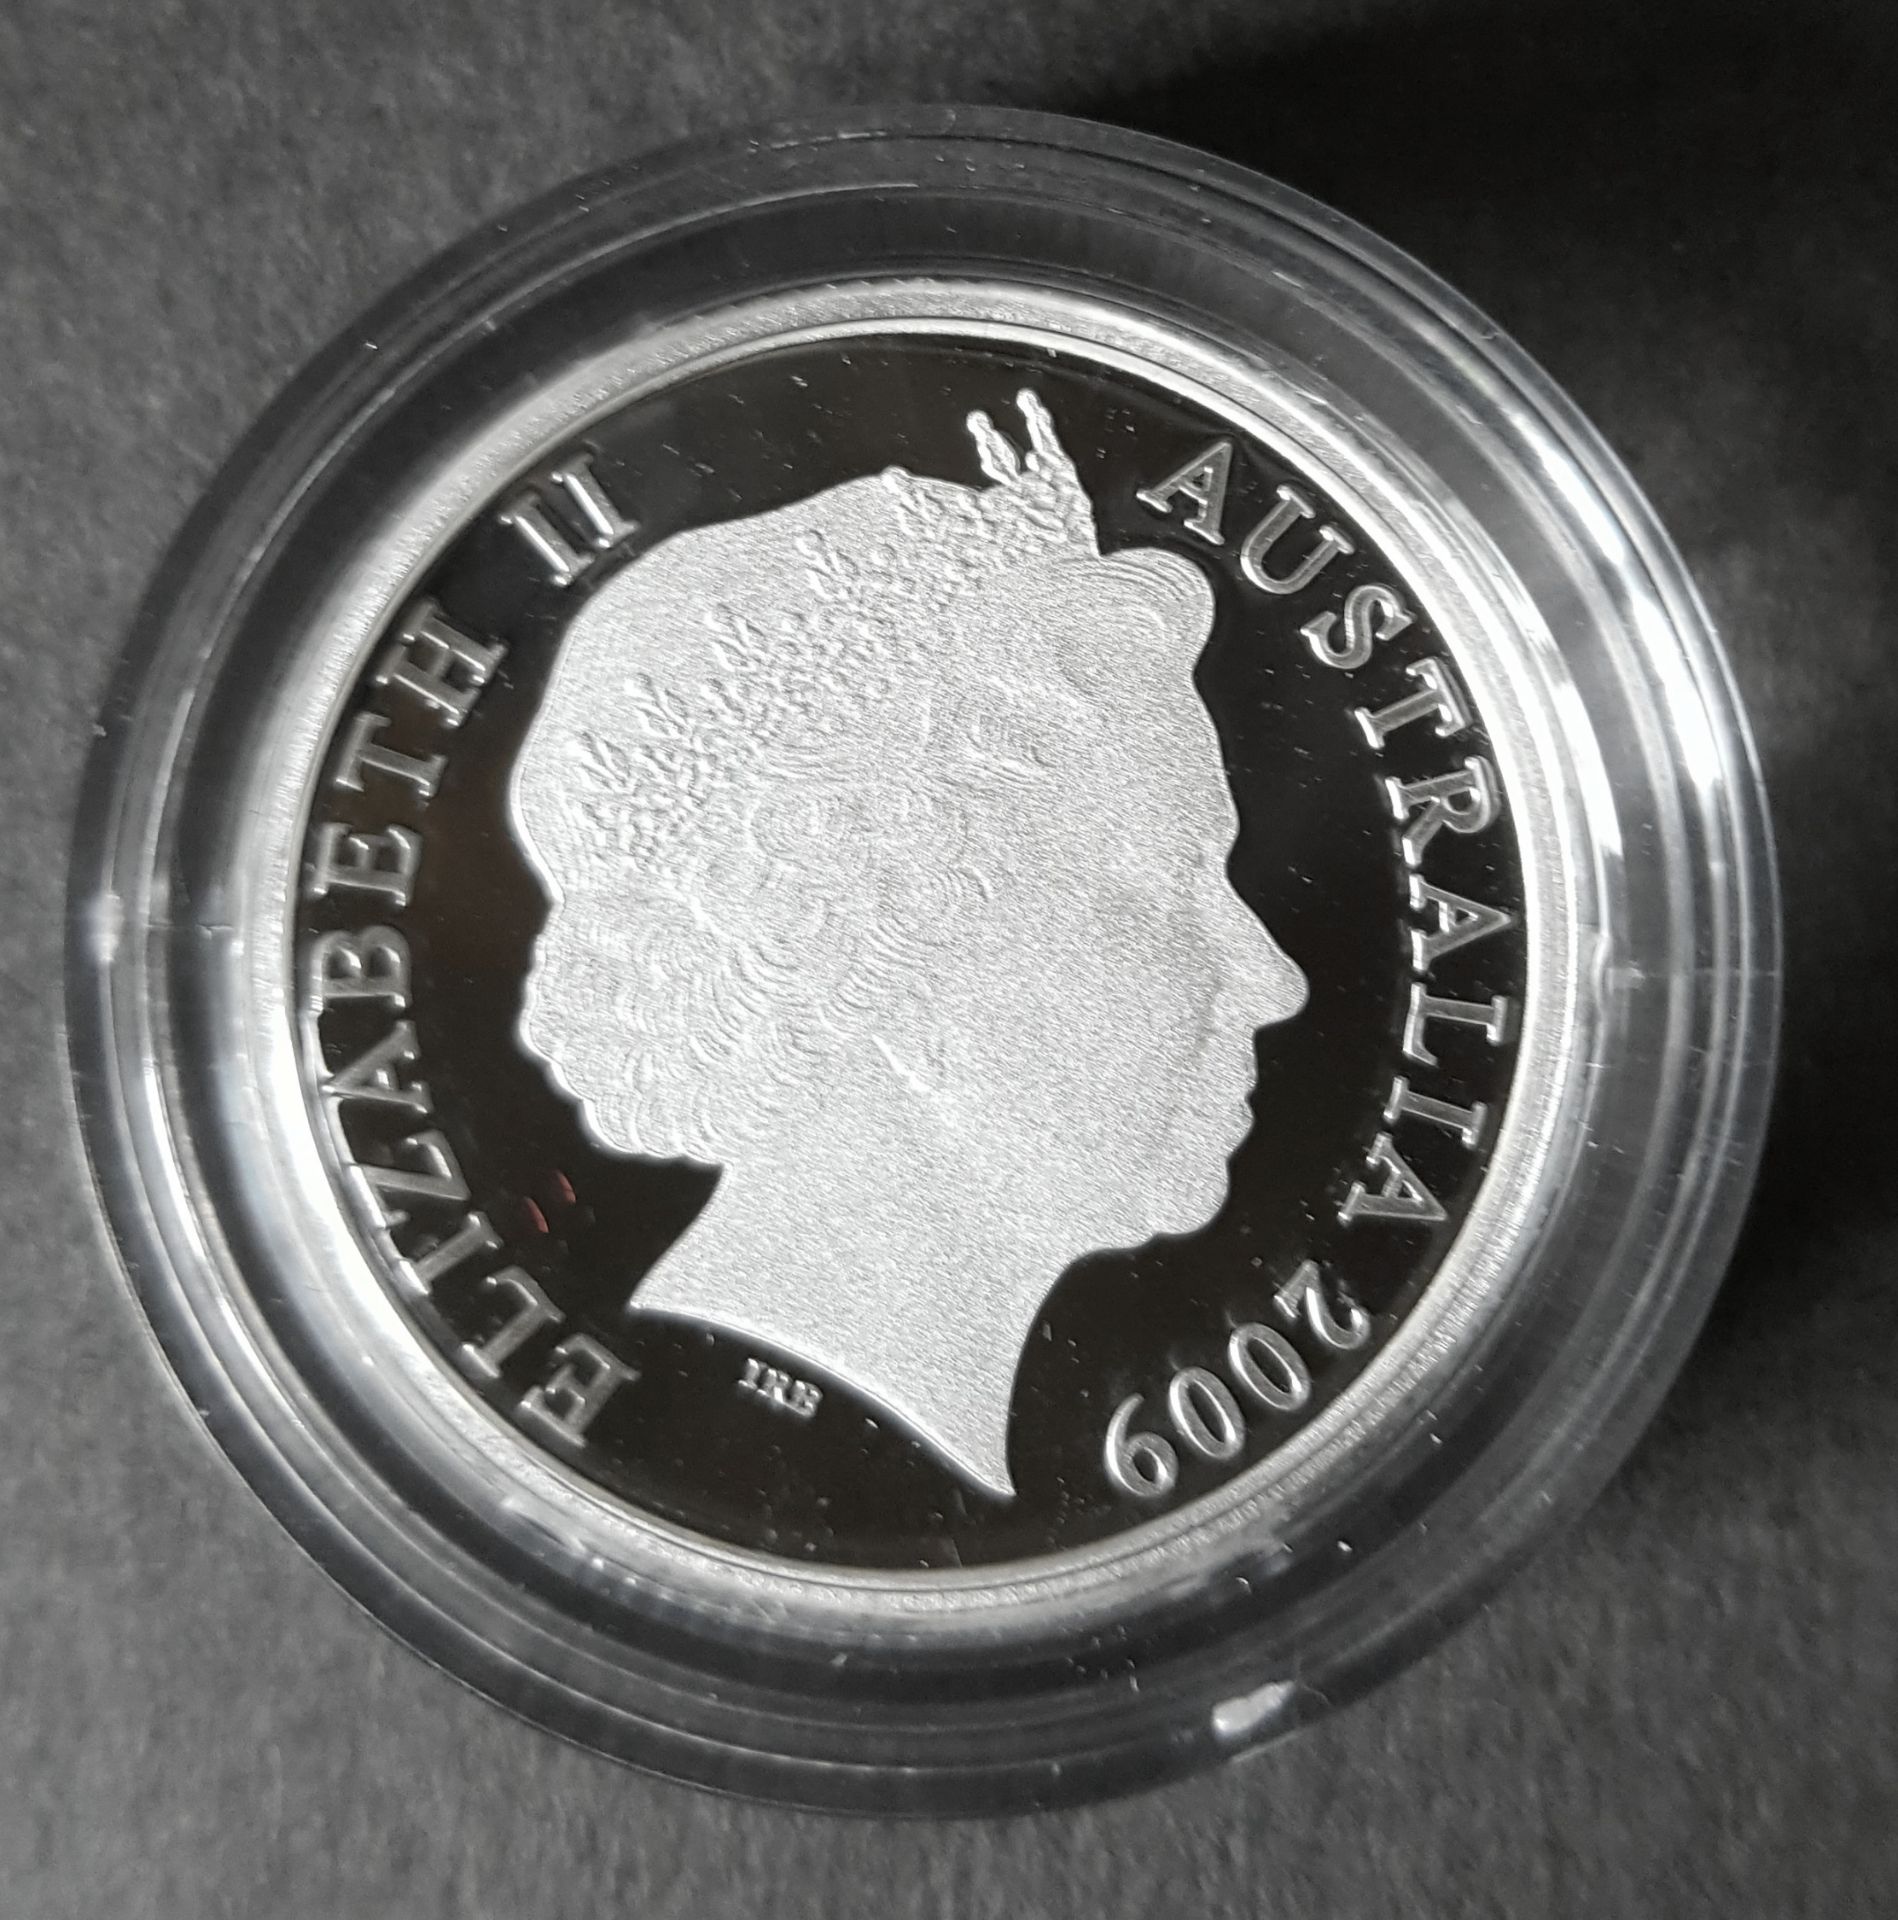 Collectable Proof Coins Silver Royal Australian Mint $1 & Perth Mint $1 Kookaburra - Image 5 of 9